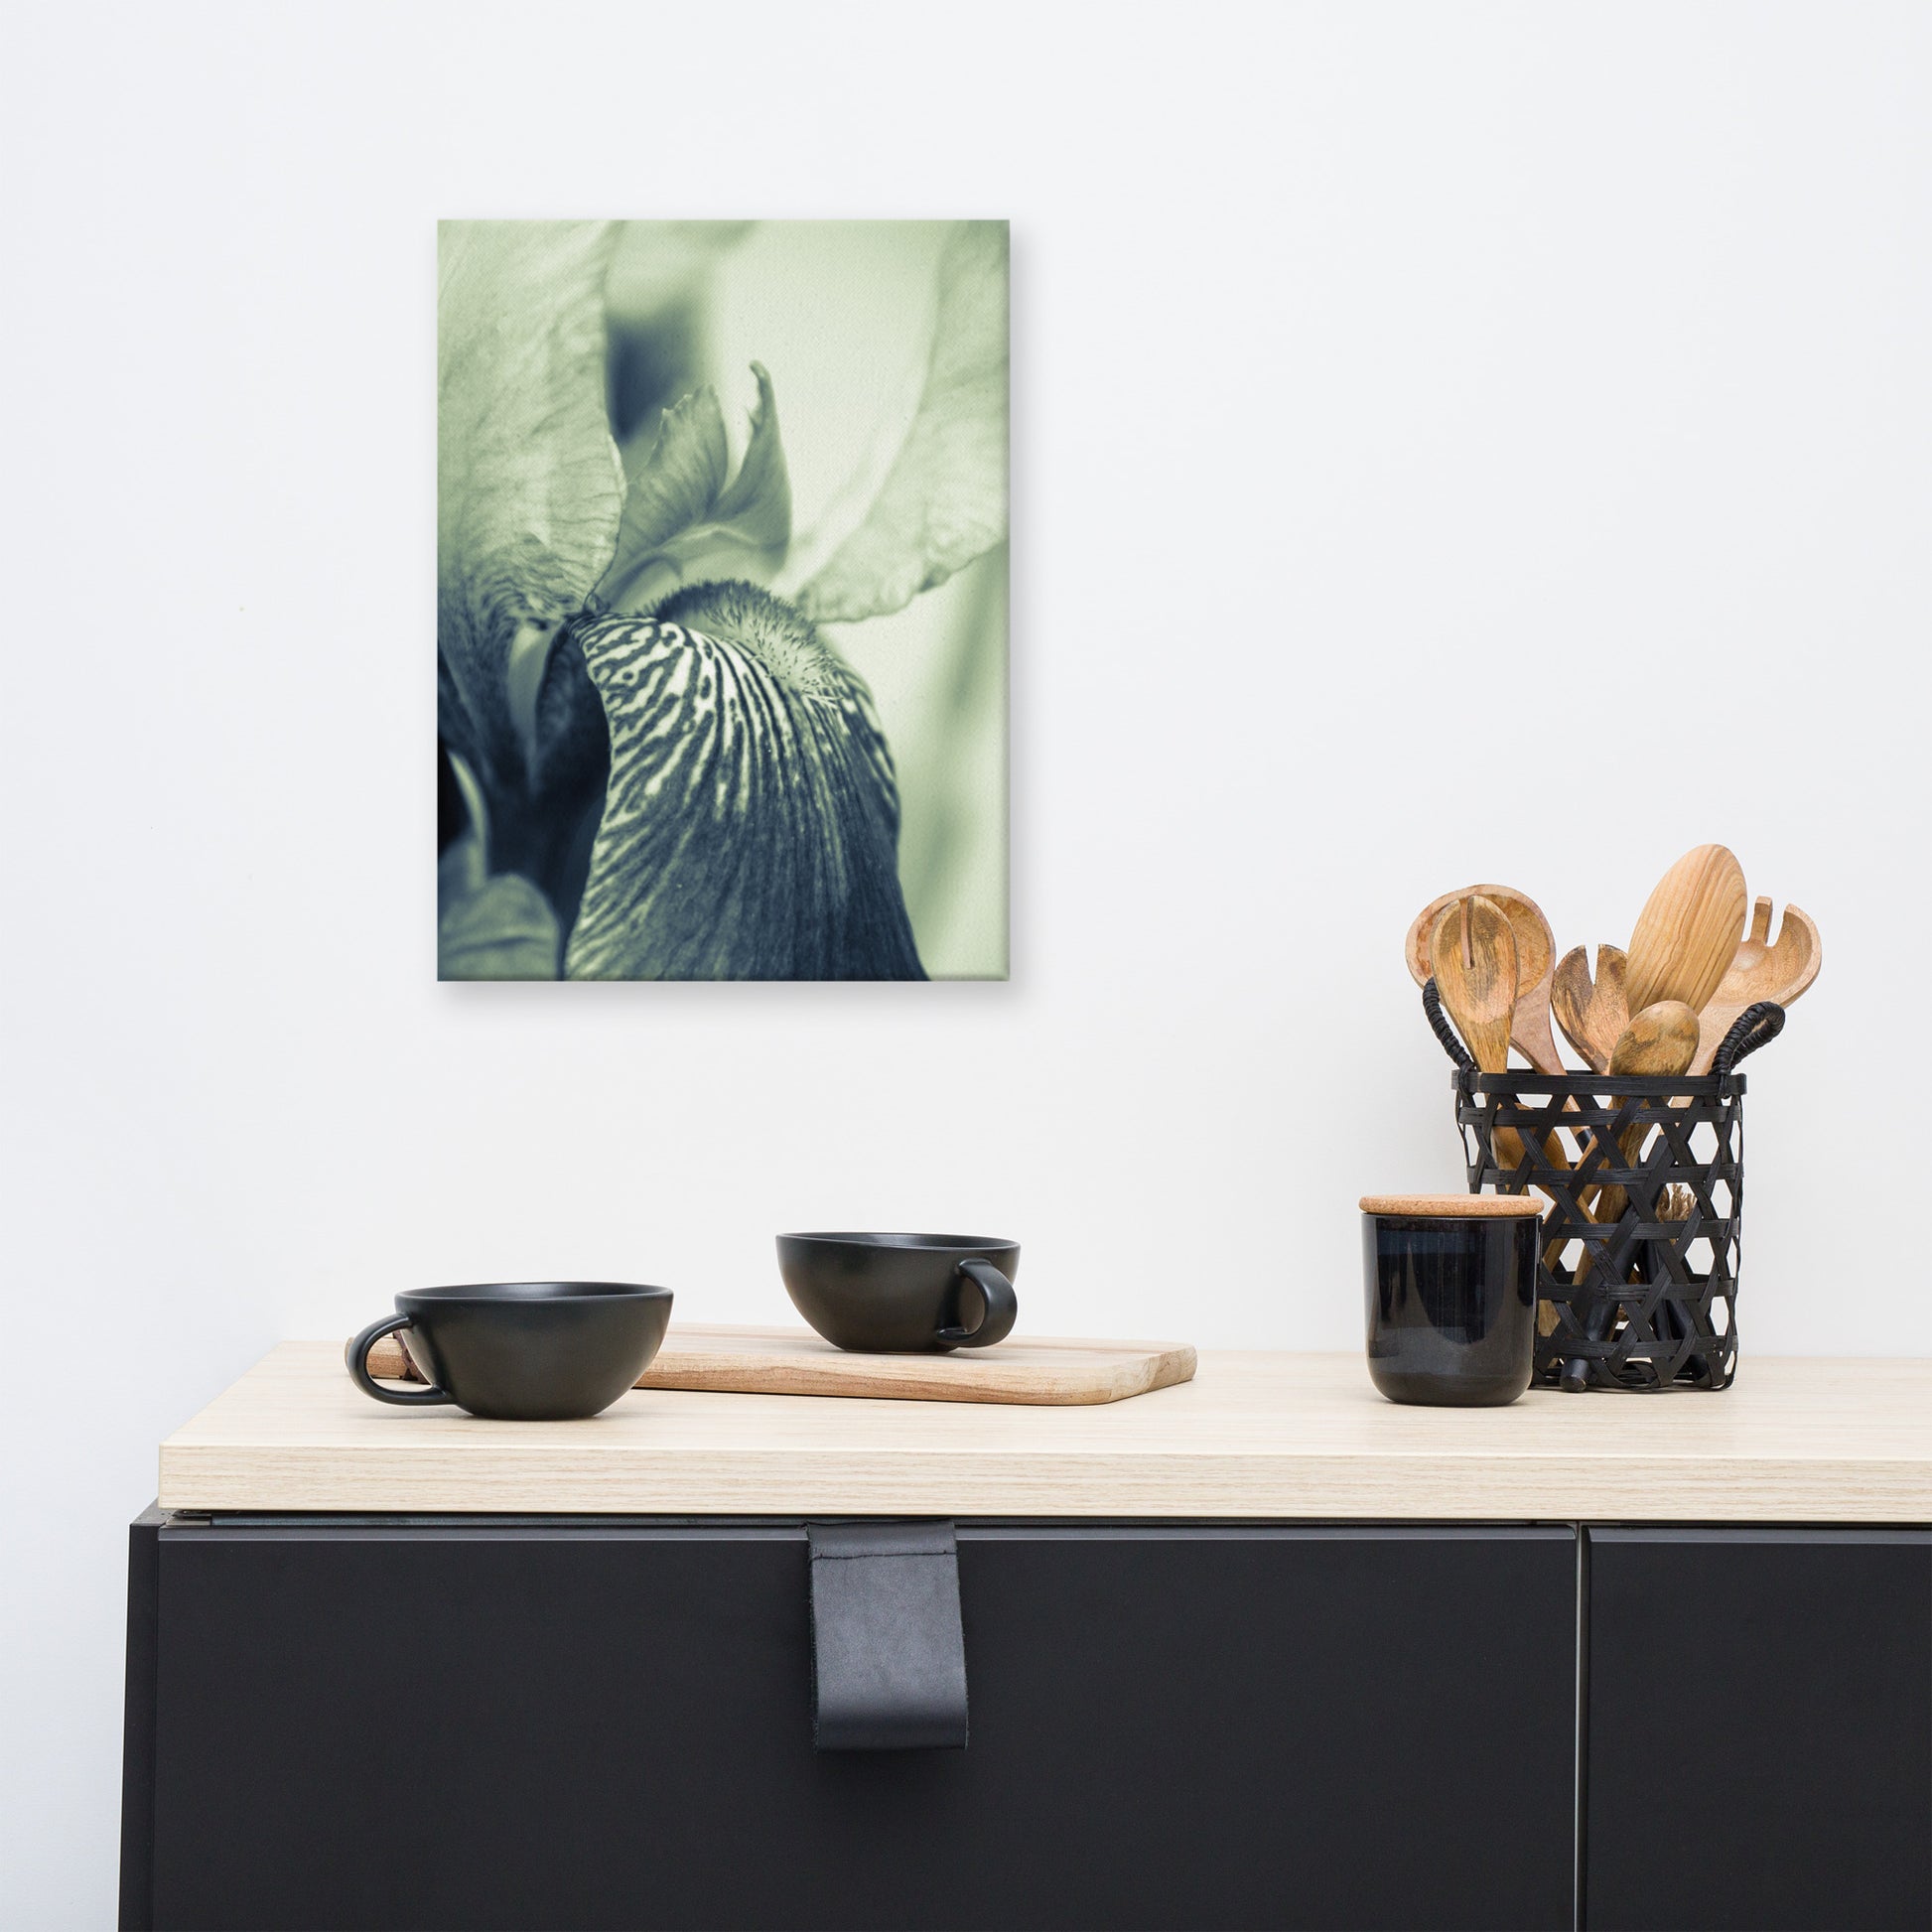 Hanging Art Above Dining Table: 